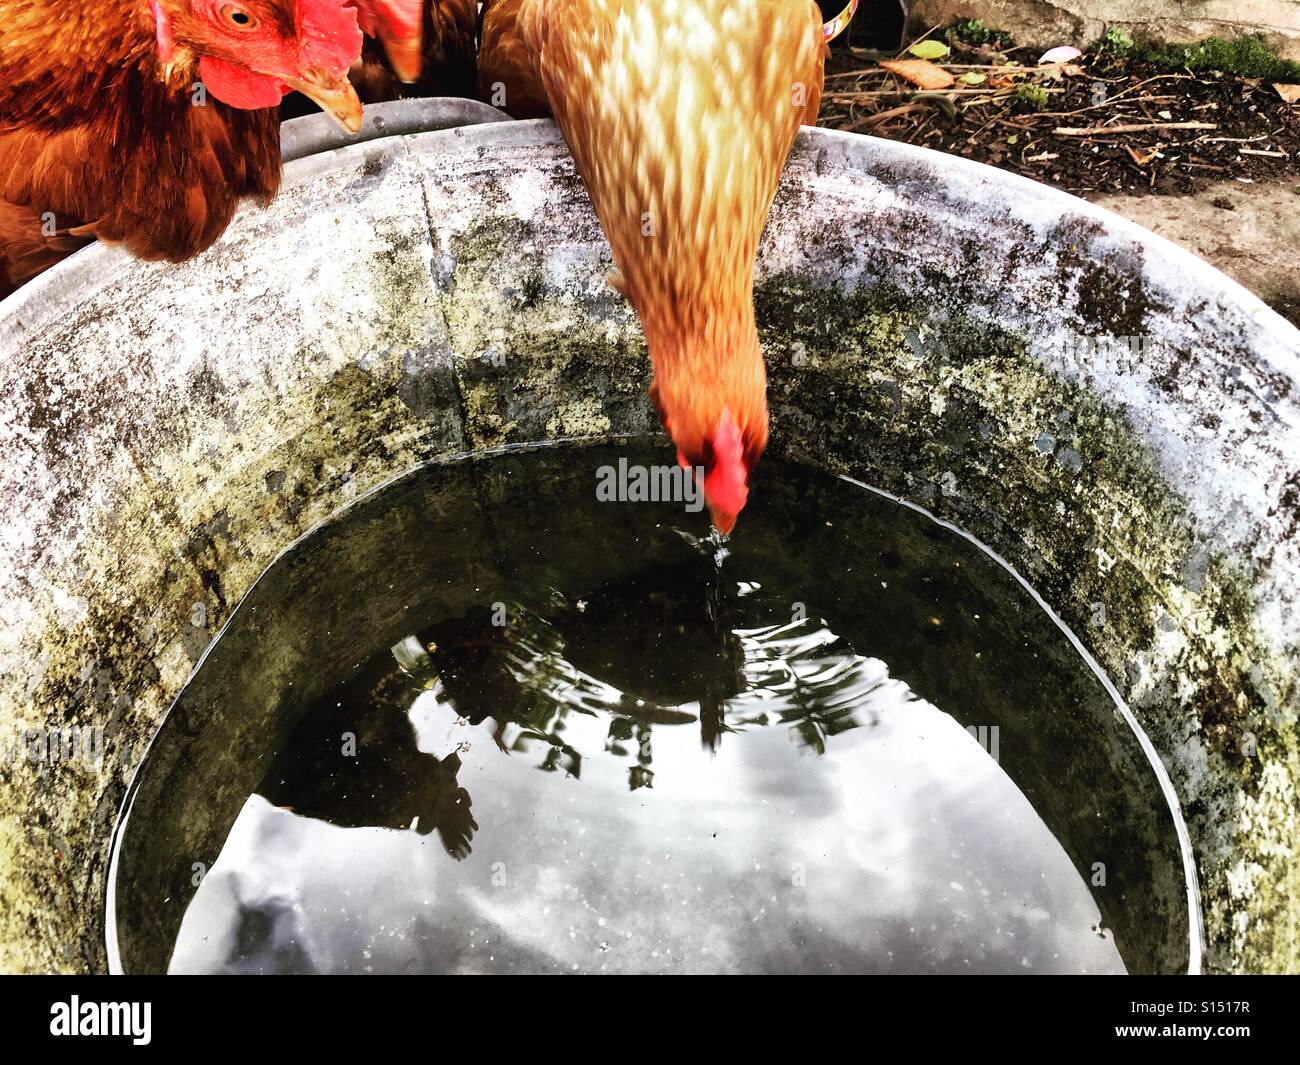 Chickens drink water from a metal bucket Stock Photo